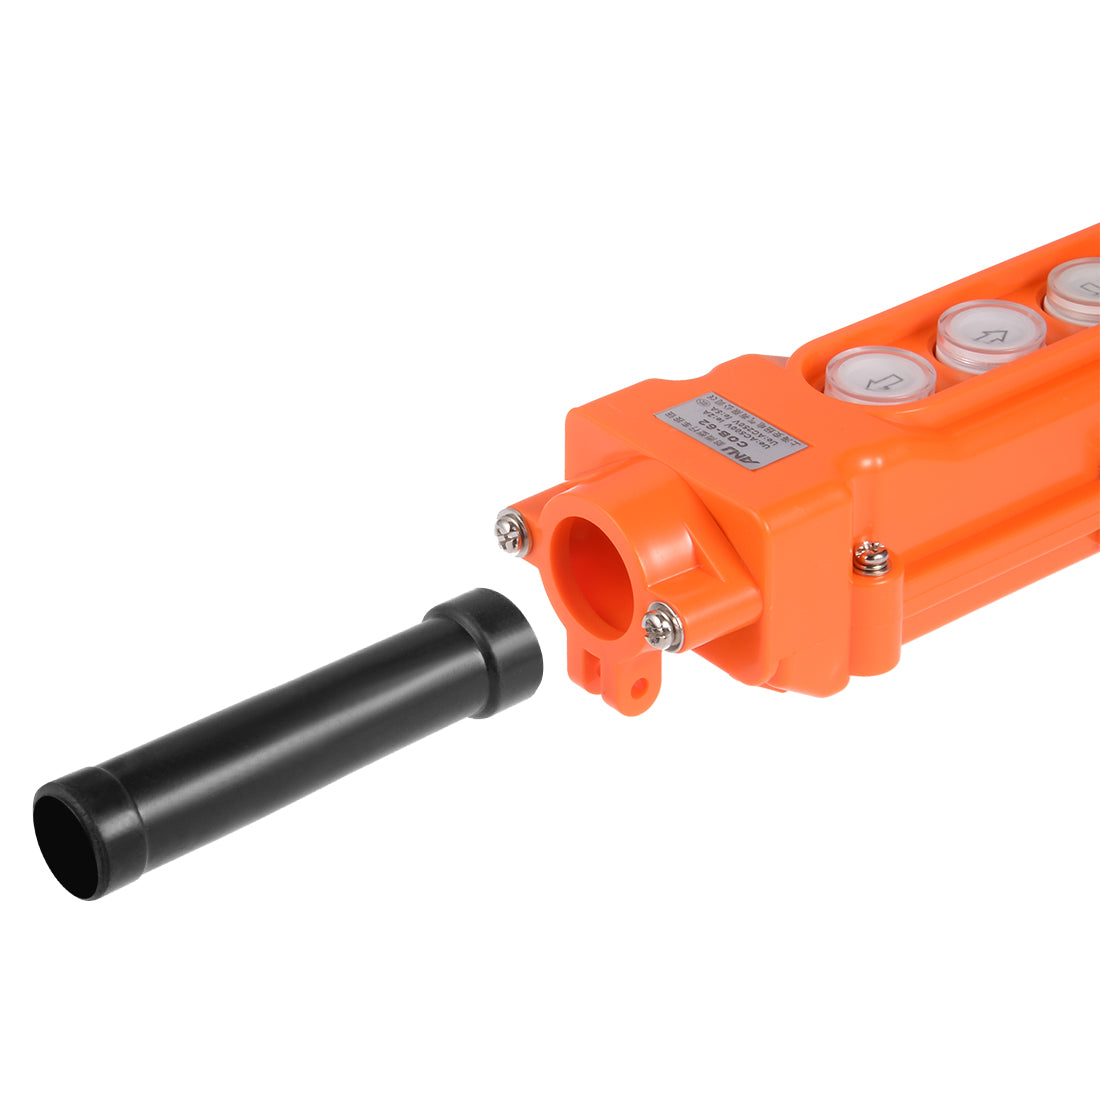 uxcell Uxcell Hoist Crane Pendant Control Station Push Button Switch Up Down Left Right 4 Ways Orange